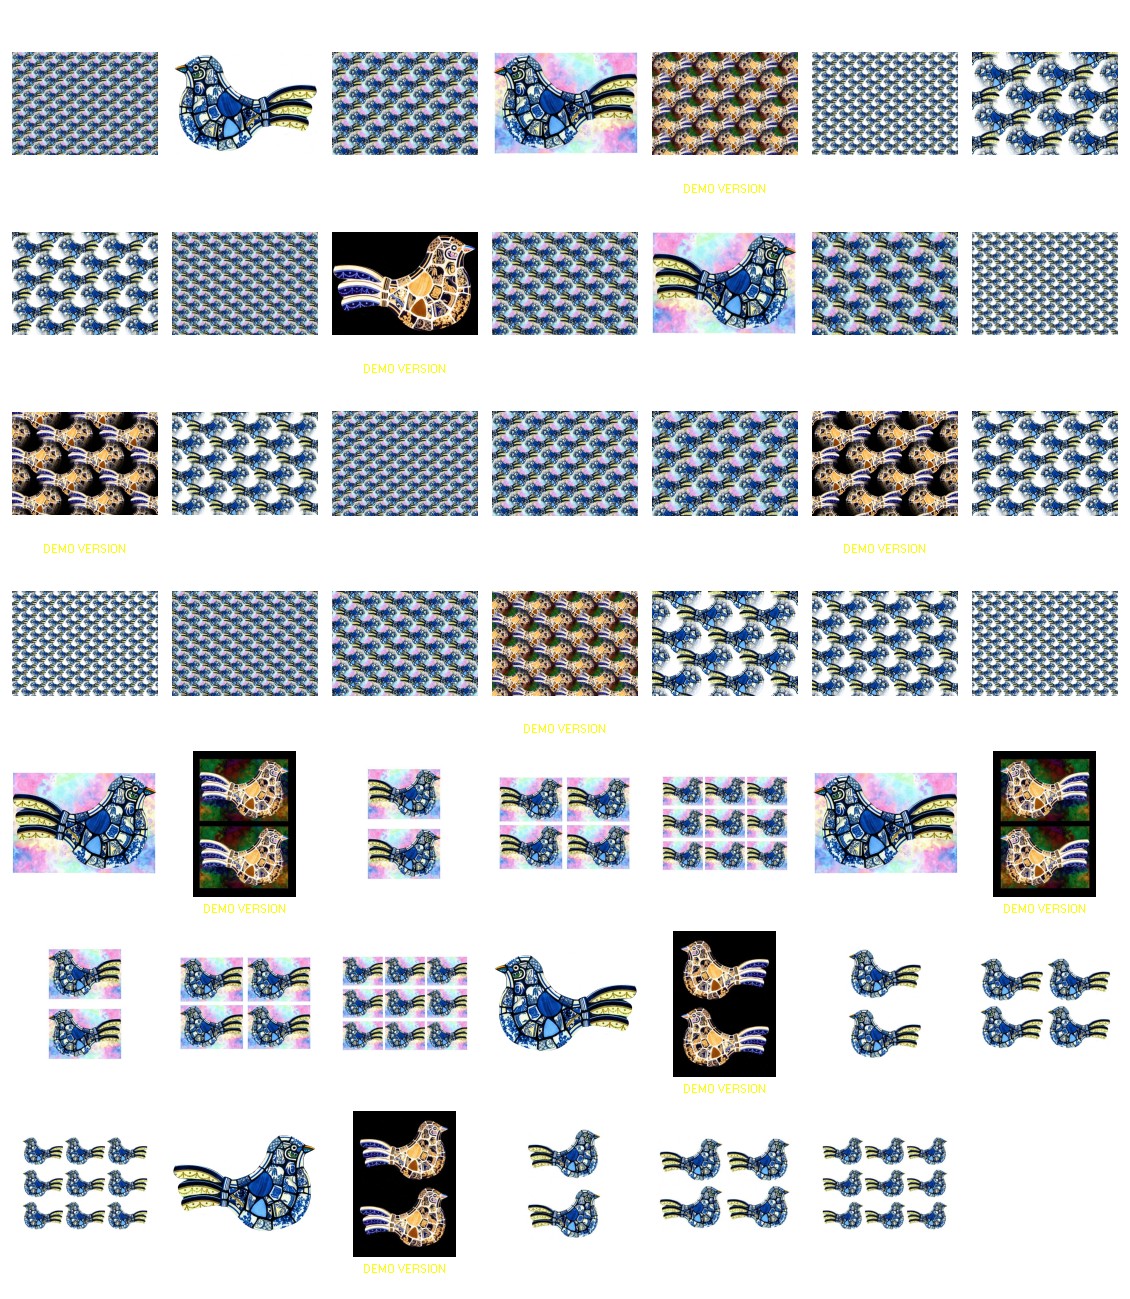 Tiled Effect Birds - Set 01 - 48 Pages to Download